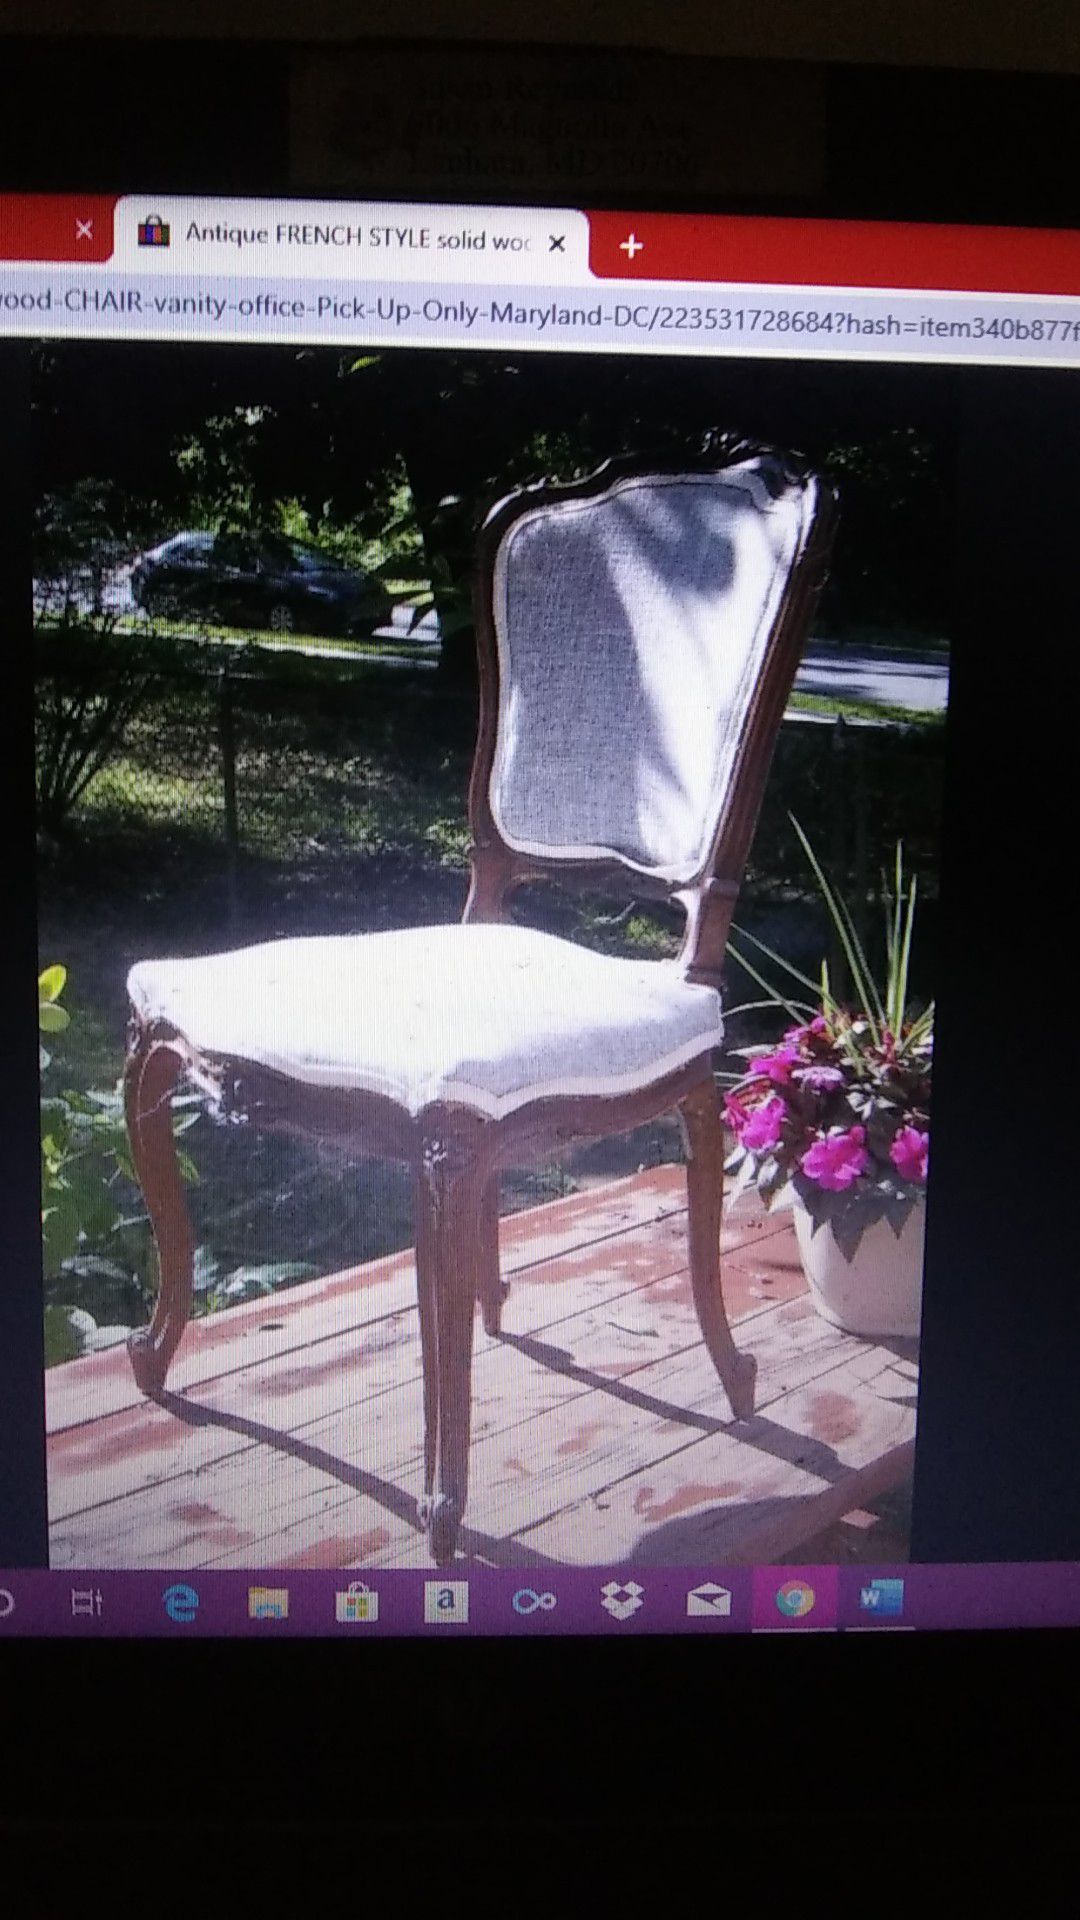 dainty French Antique CHAIR